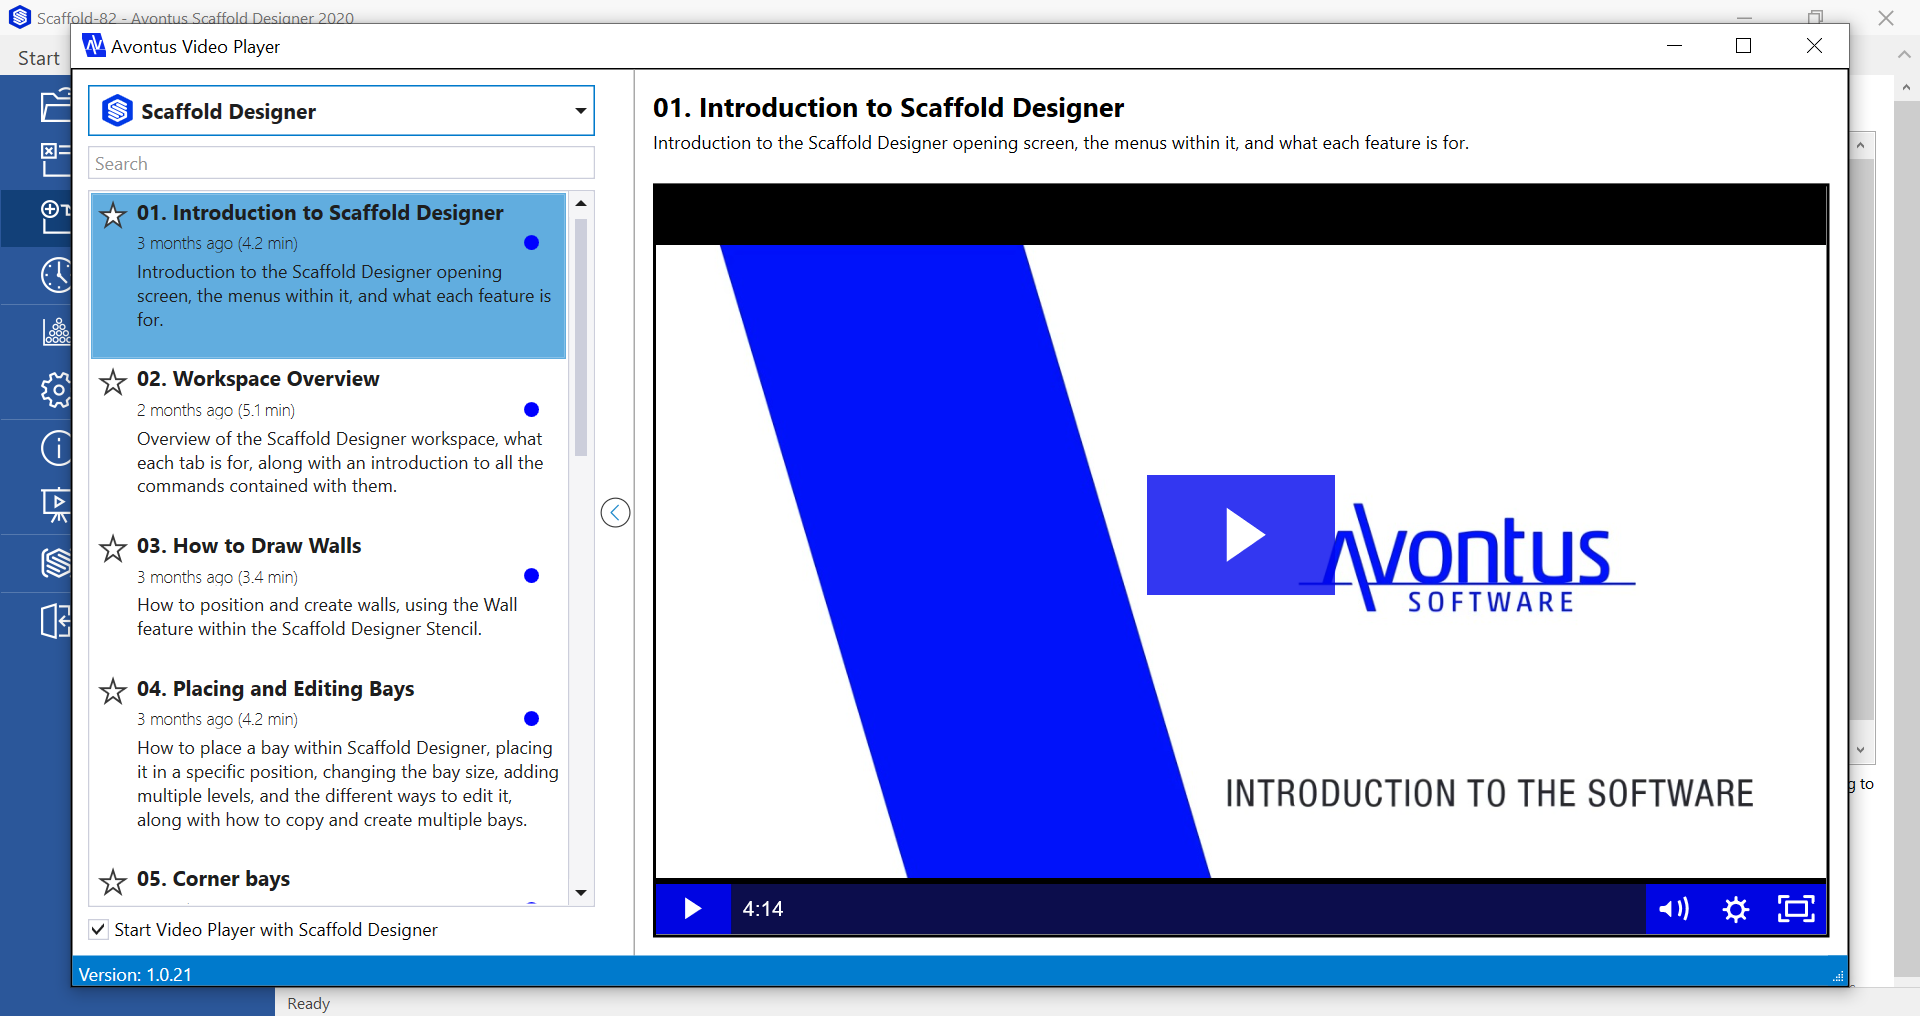 Scaffold Designer's new Training Video Player allows users to learn the software quickly.